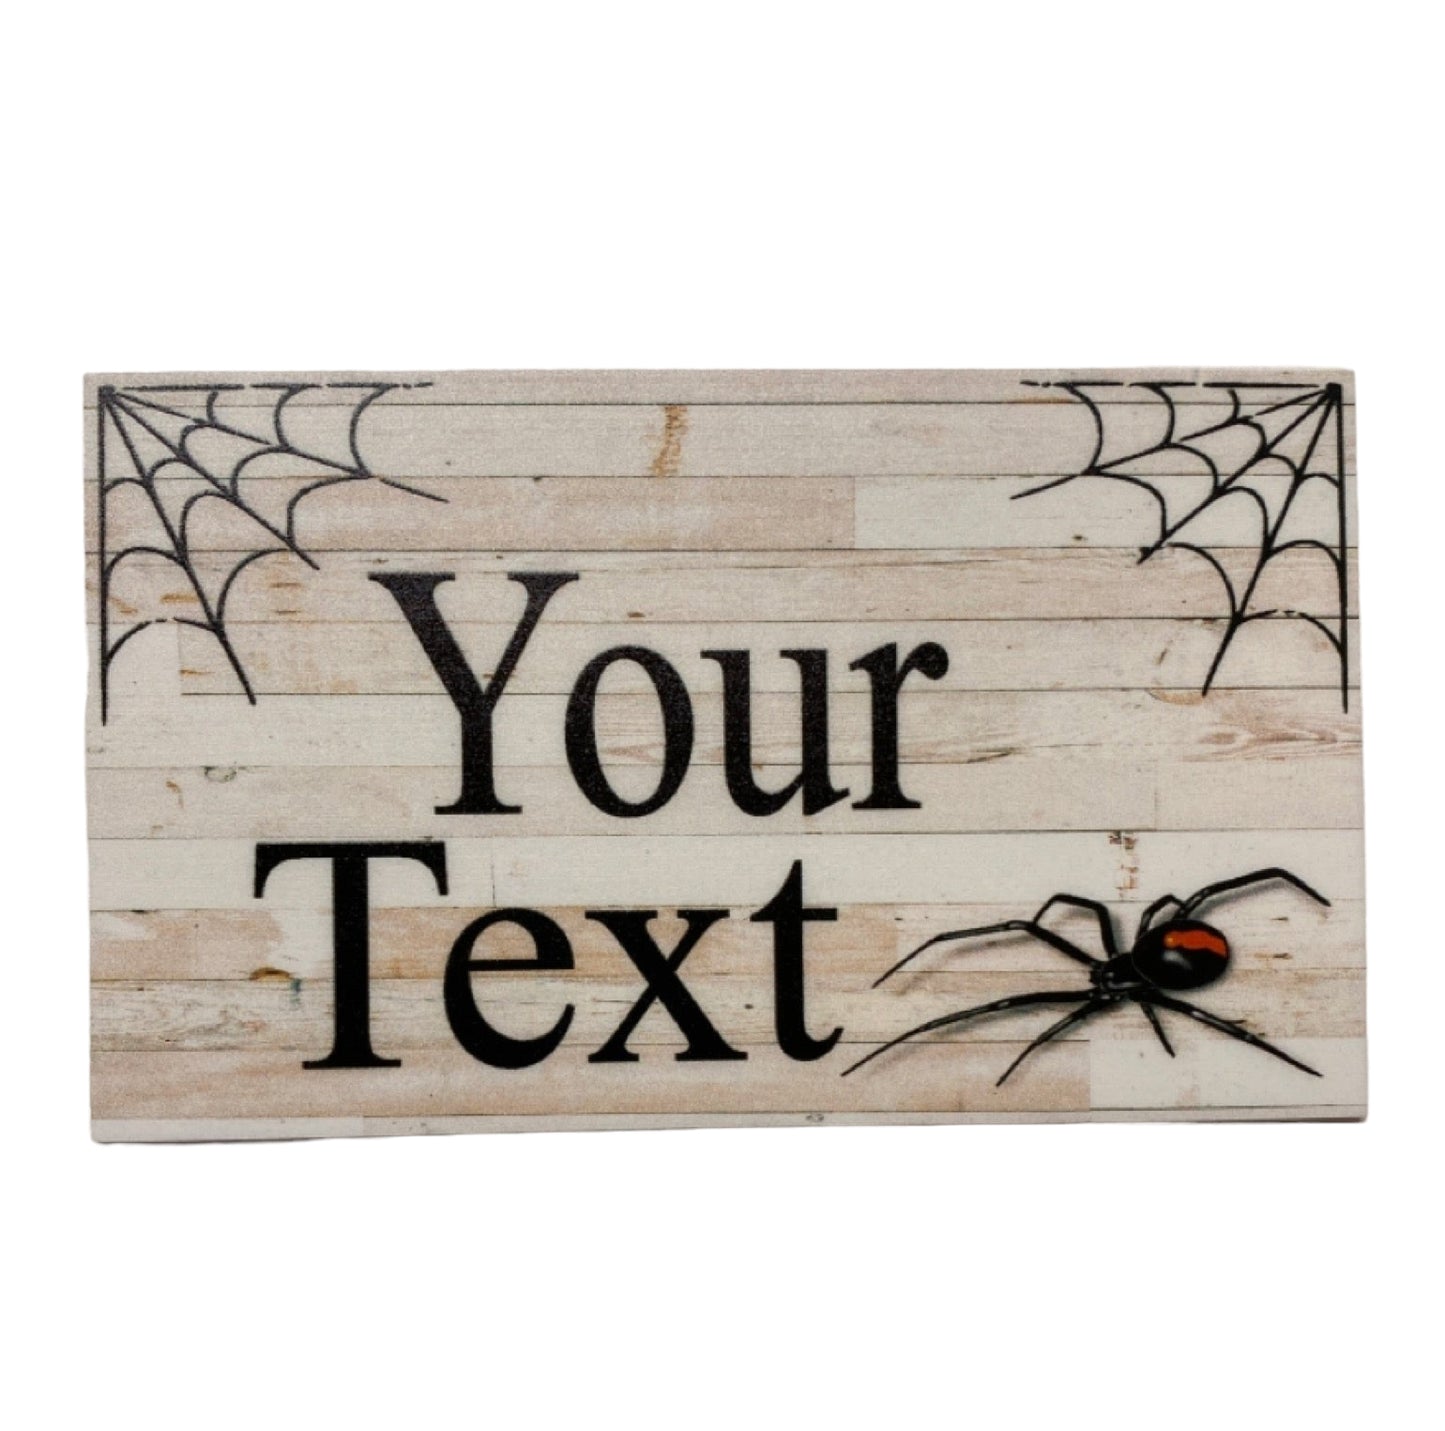 Redback Spider Custom Personalised Sign - The Renmy Store Homewares & Gifts 